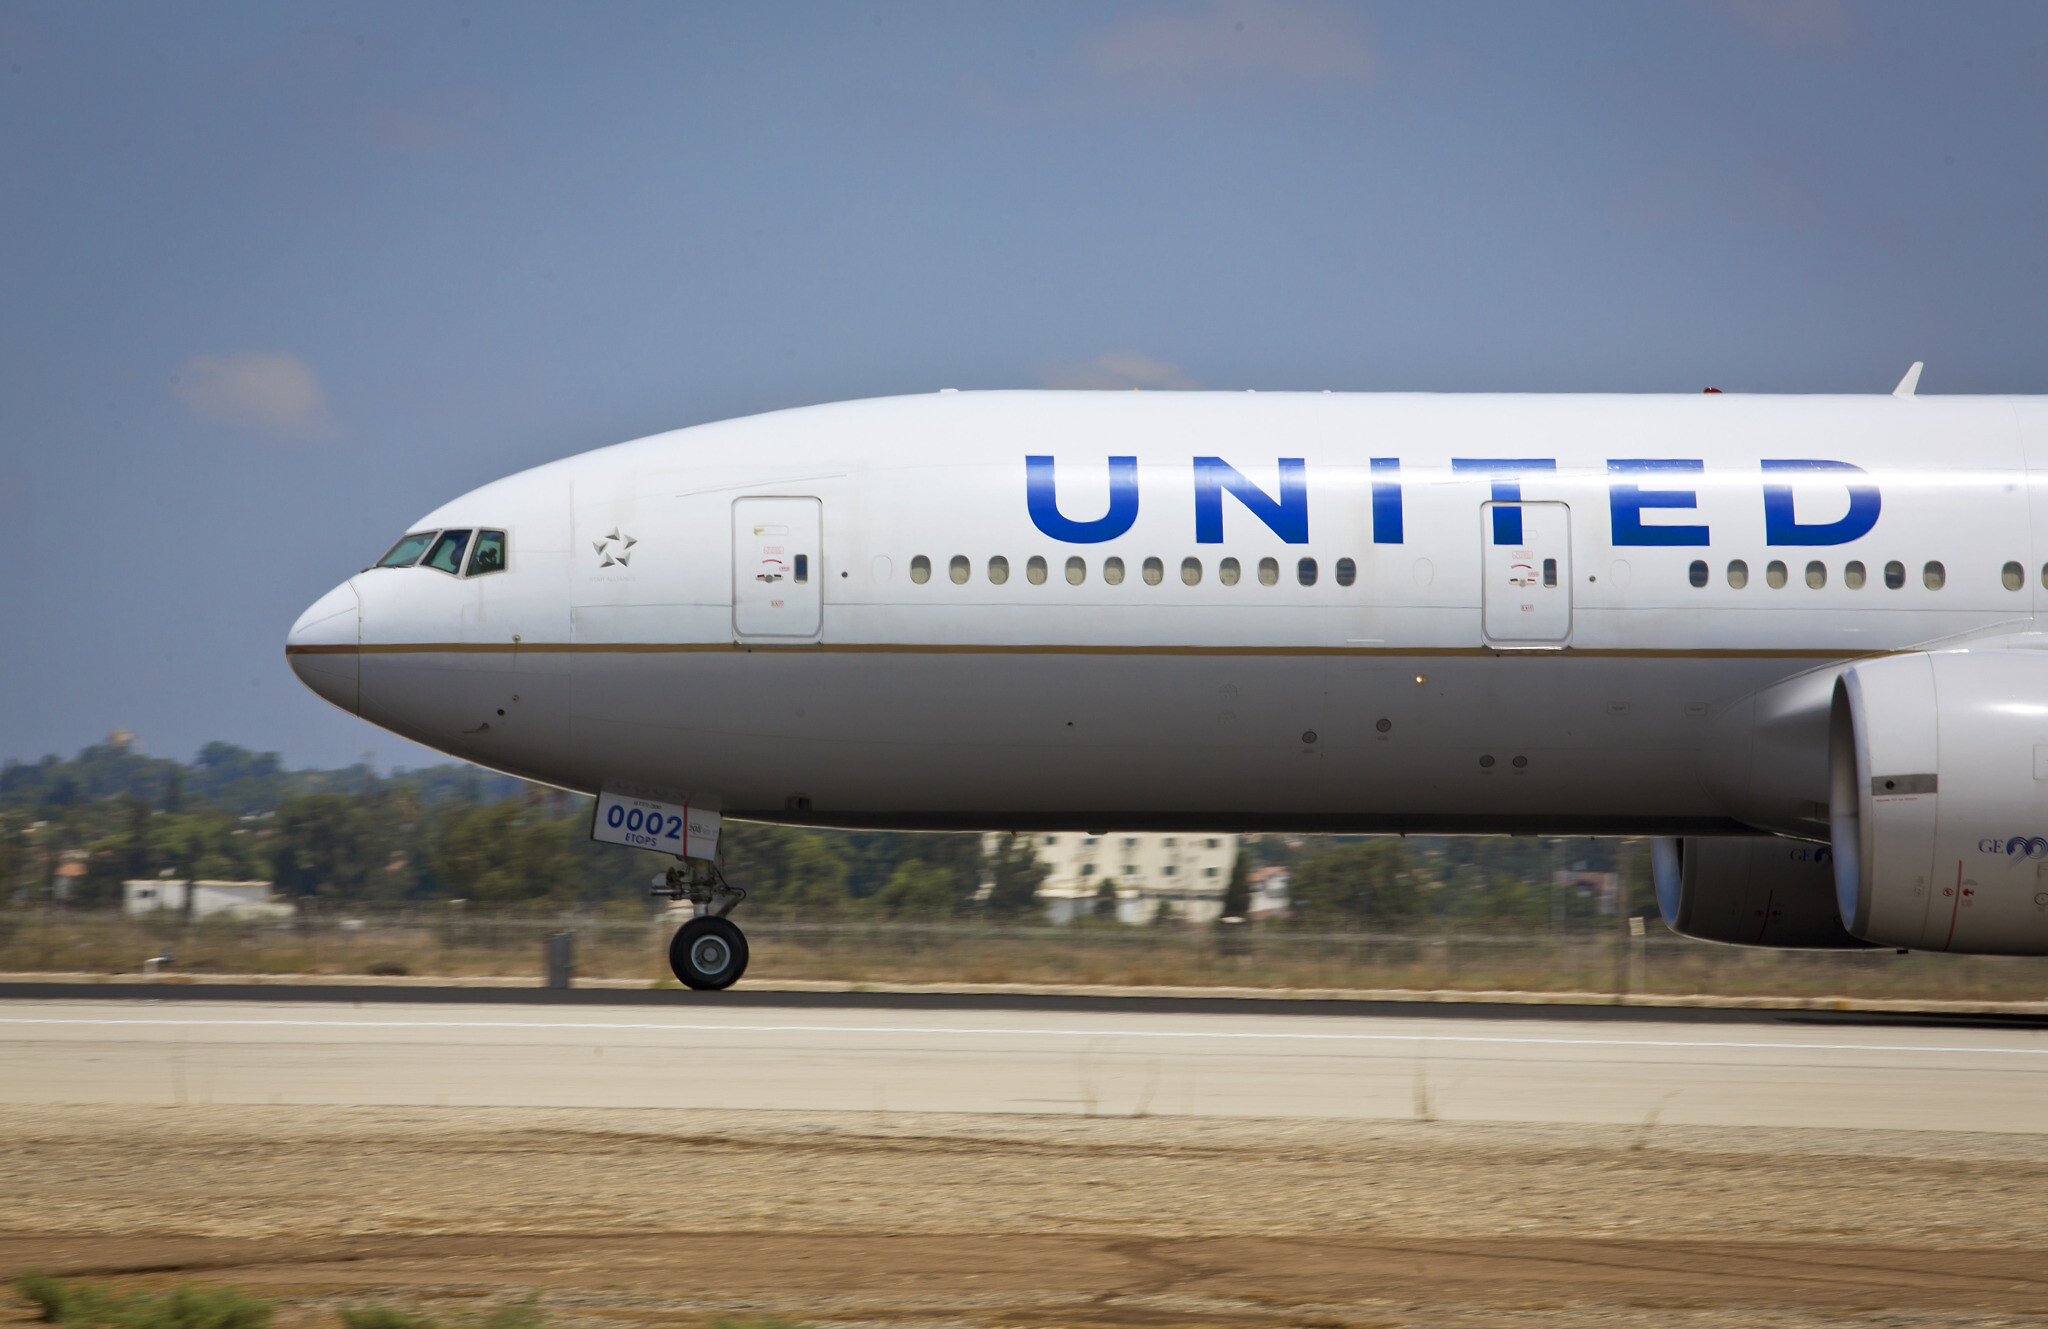 United to resume direct flights to Israel, the first US carrier to do so since Oct. 7